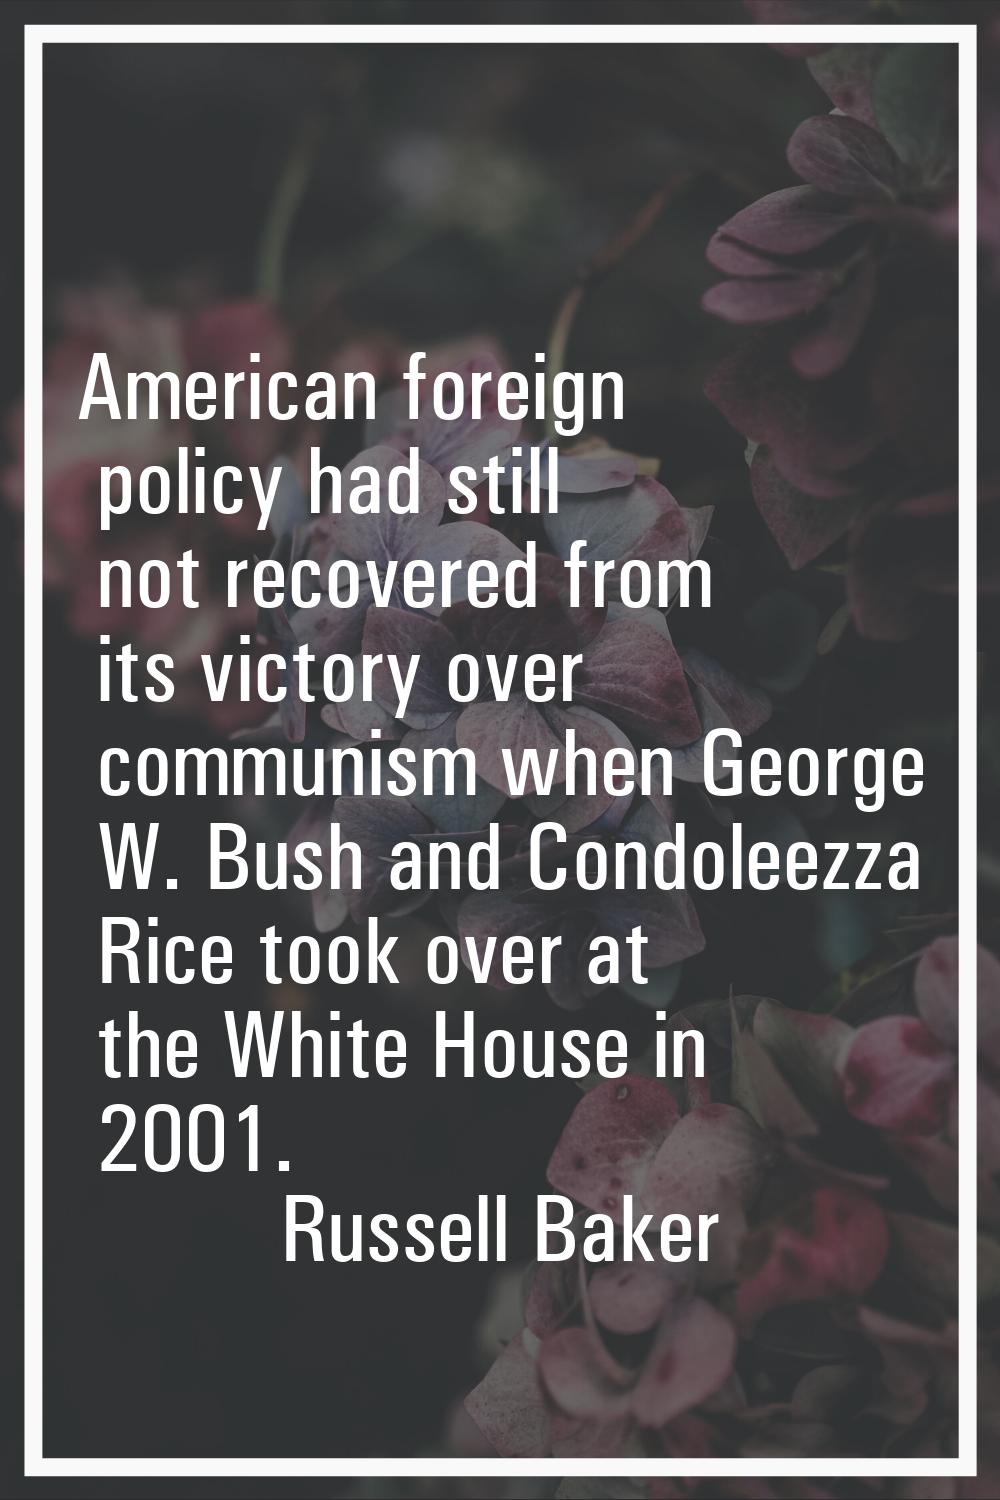 American foreign policy had still not recovered from its victory over communism when George W. Bush